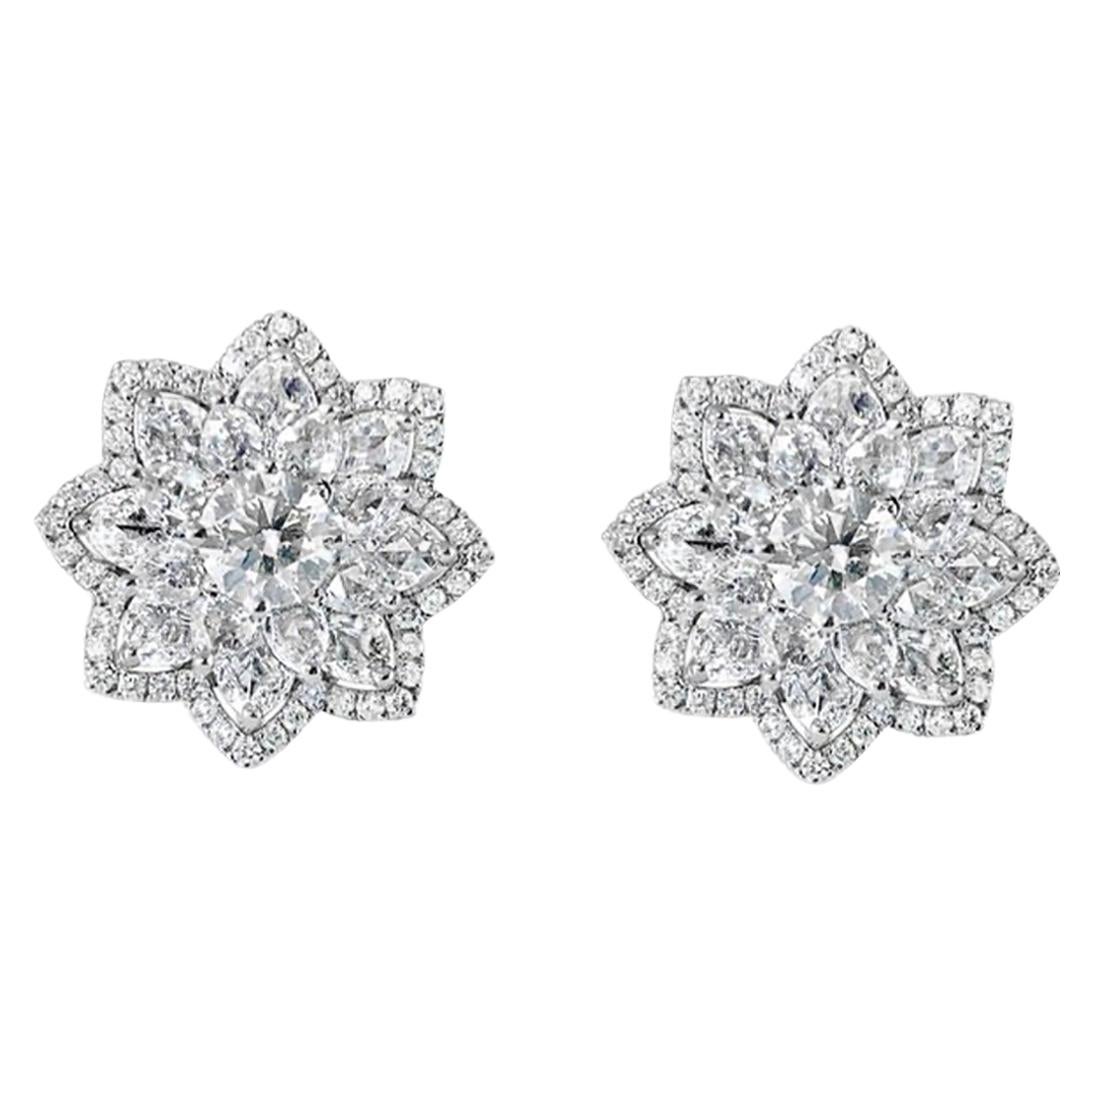 Round Brilliant and Rose Cut Diamond Stud Earrings in 18 Karat White Gold